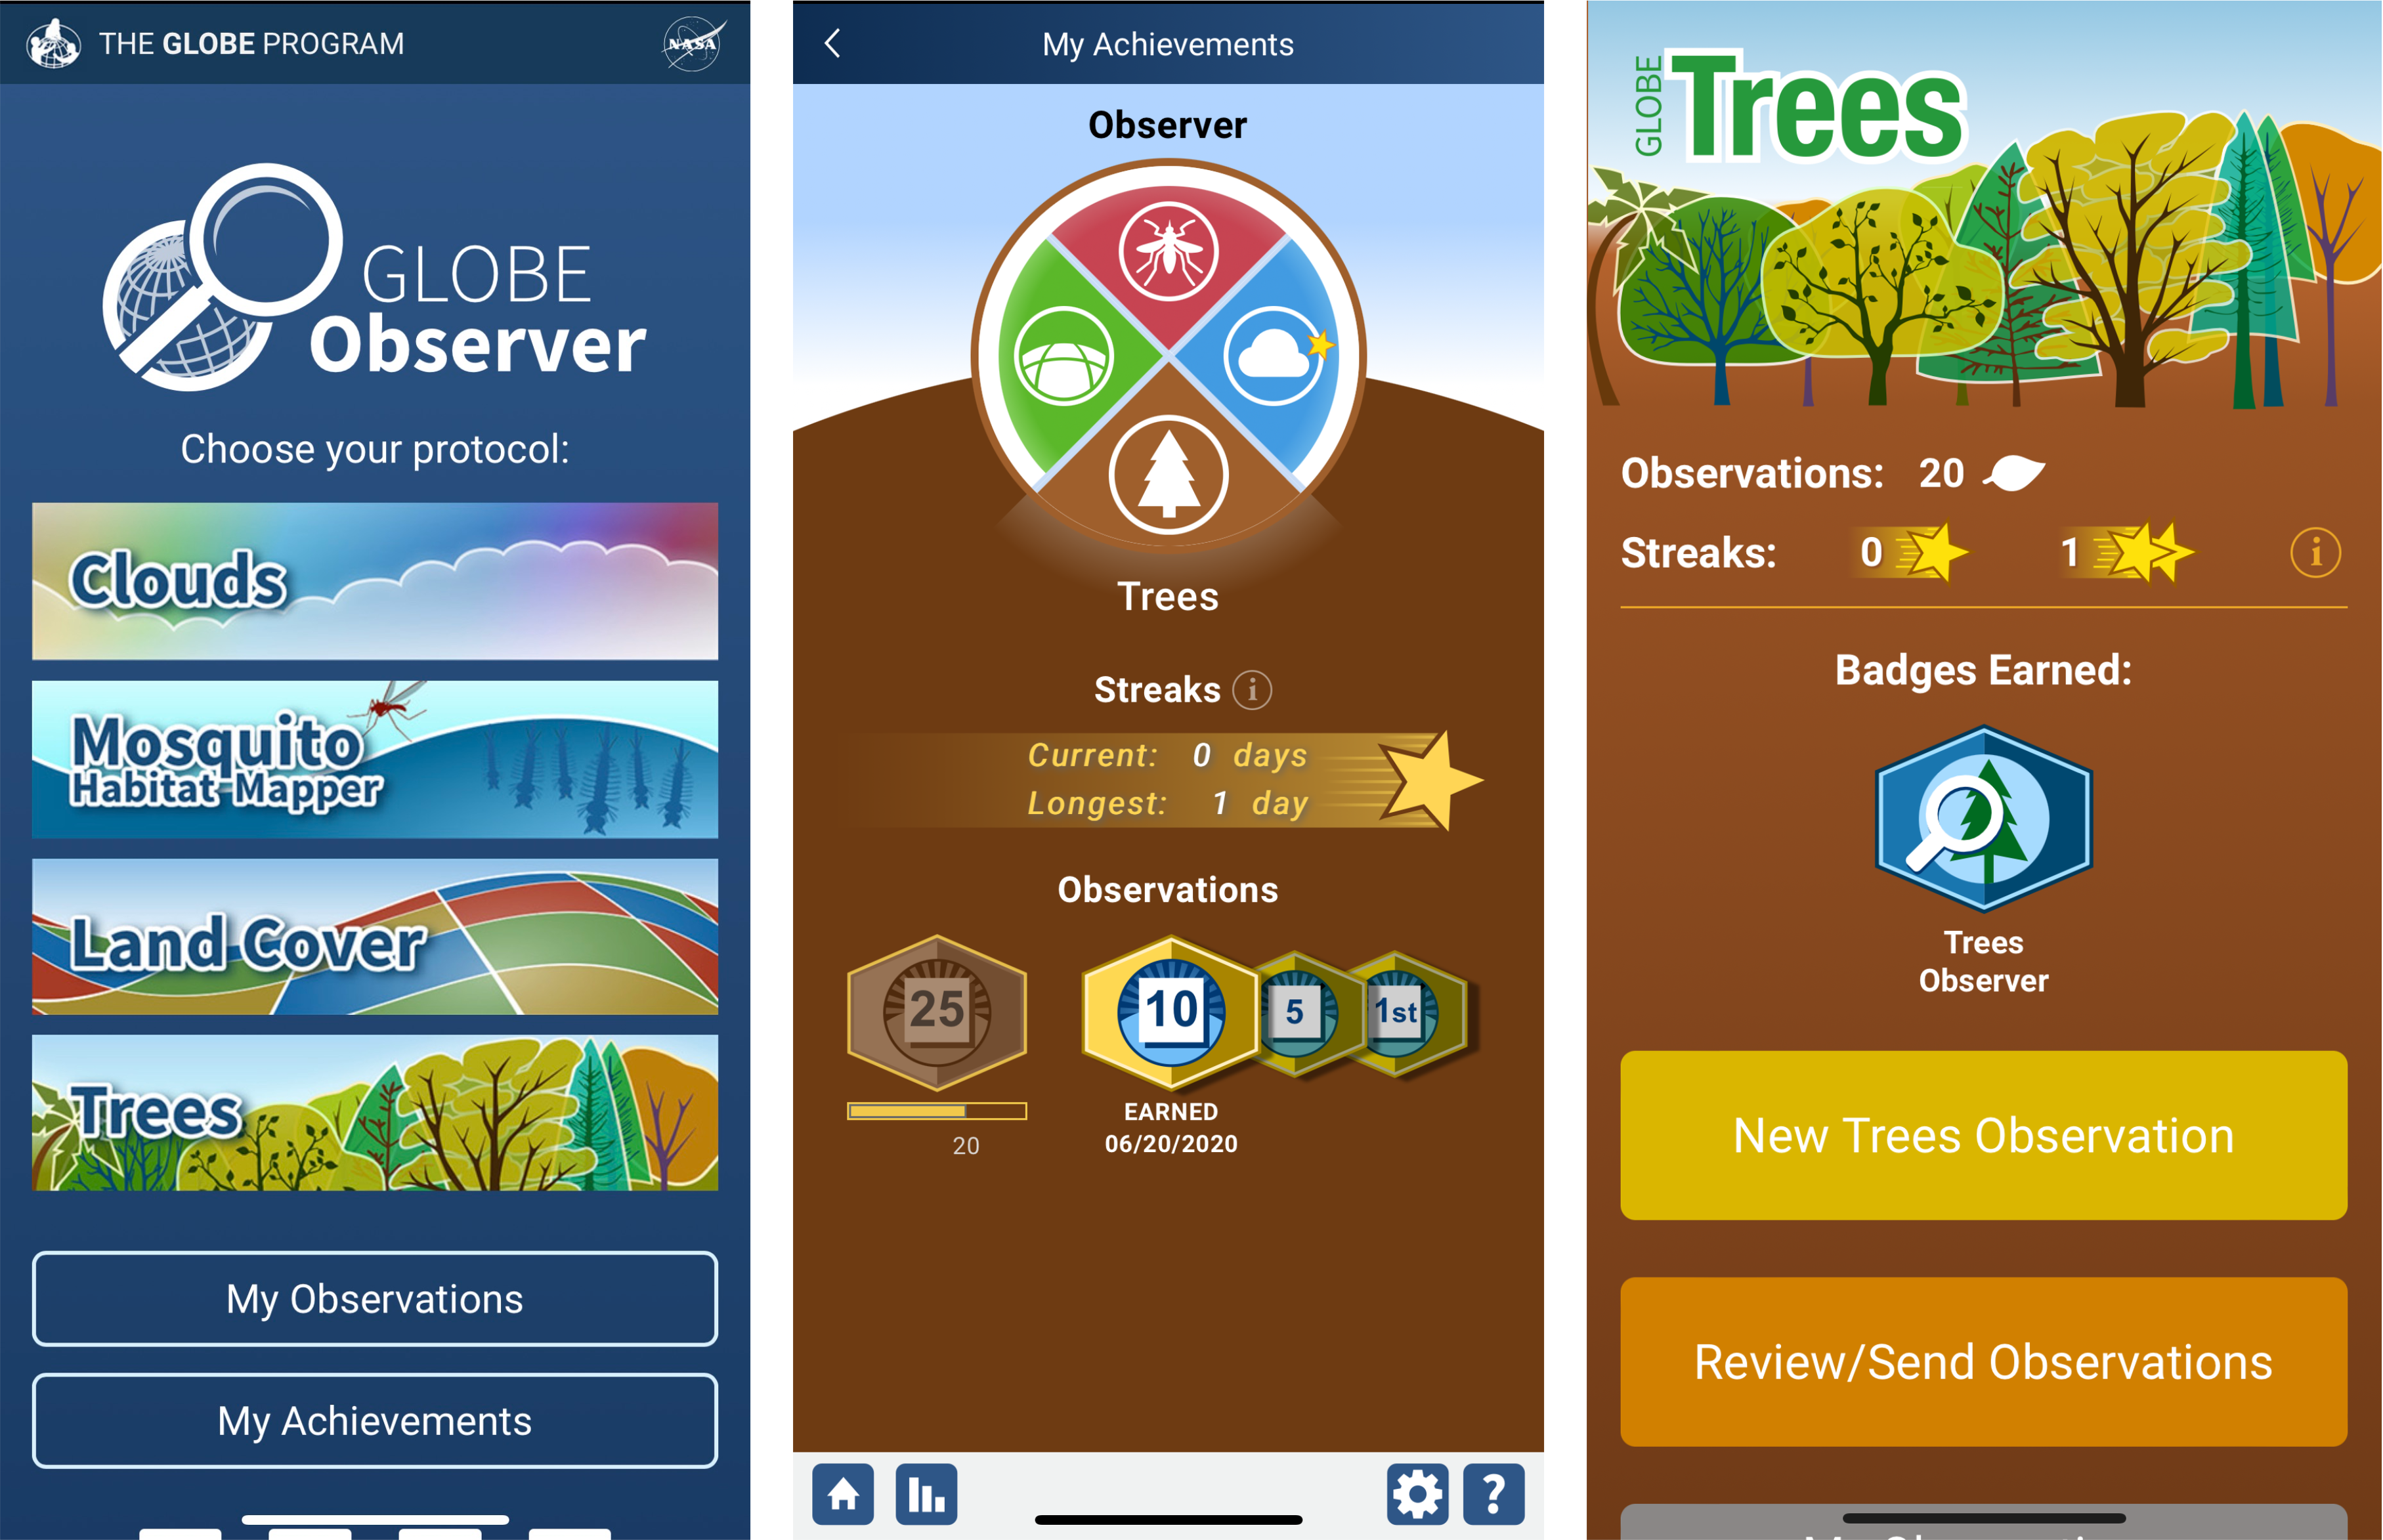 Three screenshots from the GLOBE Observer app. The first shows the GLOBE Observer home screen with a button for My Achievements. The second shows the My Achievements screen with Trees selected. Under the streak heading is a star and text indicating that the current streak is 0 days and the longest streak is 1 day. The volunteer has earned a milestone badge for 10 observations and is working to earn the 25 observation badge. The third screenshot shows the Trees protocol home screen. On the top of the screen, text indicates that the volunteer has made 20 observations and has no streaks in progress. The longest streak is 1 day. 